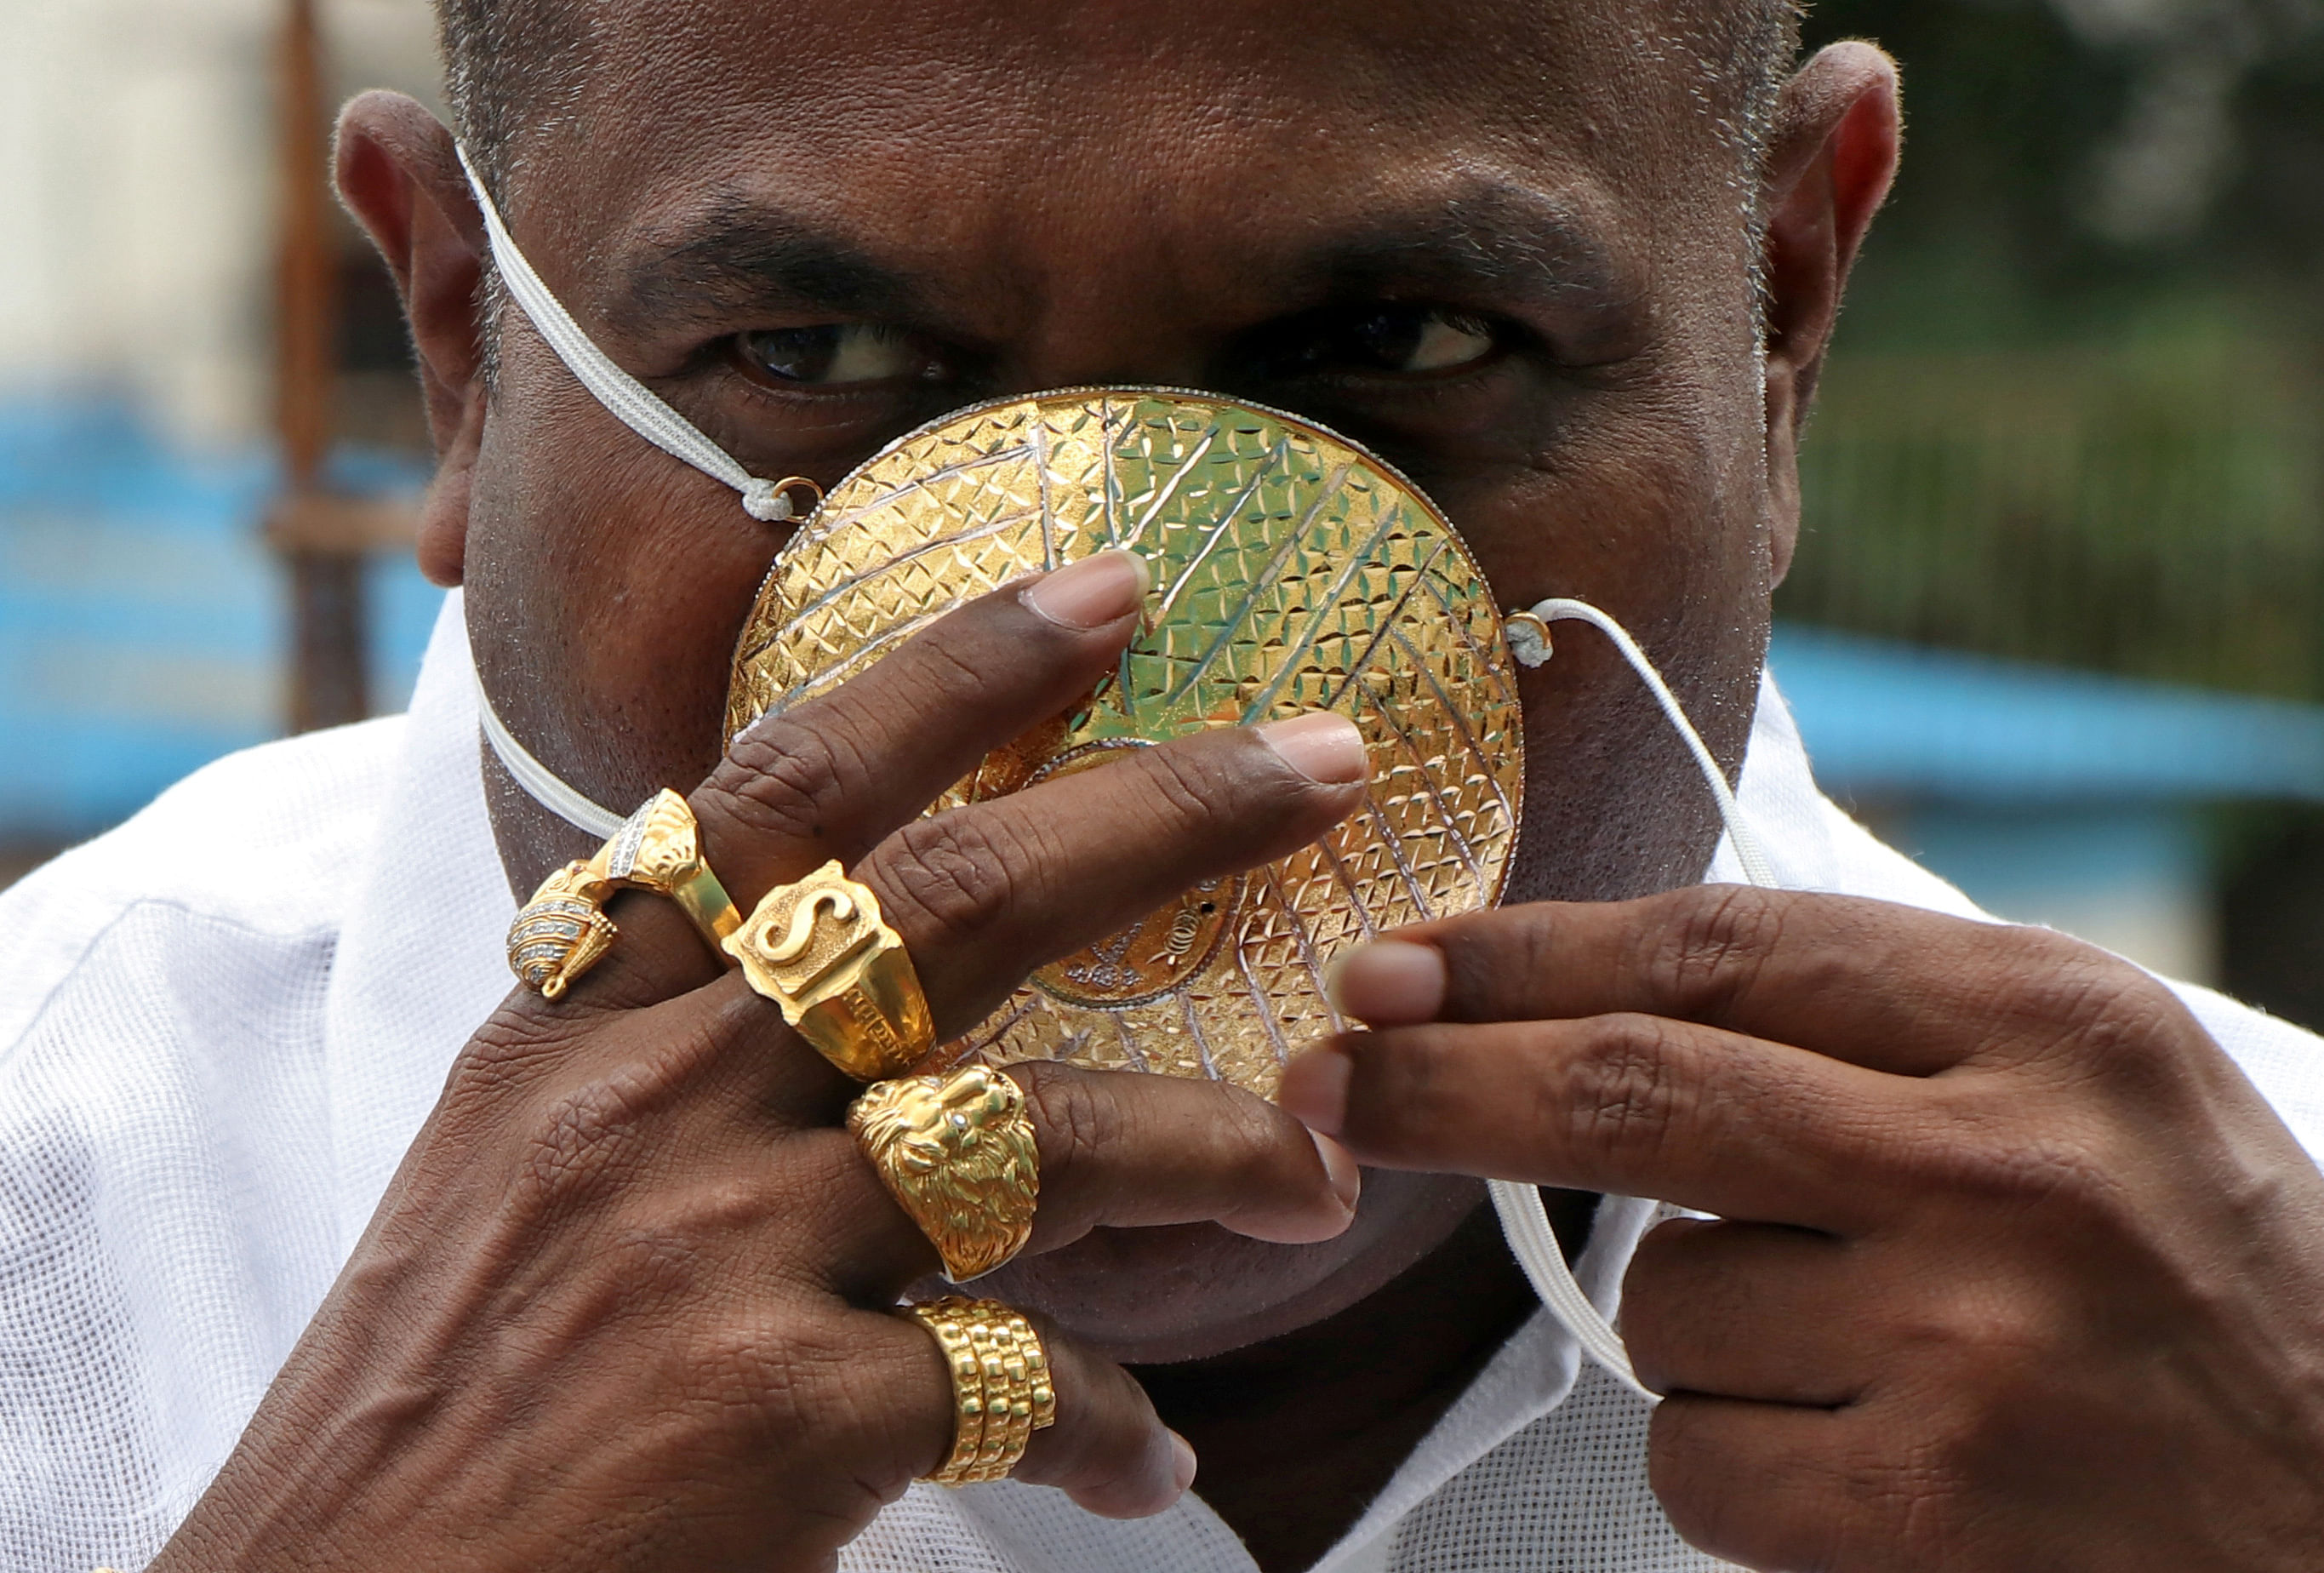 Shankar Kurhade (48), shows his face mask made out of gold as he poses for a photograph amidst the spread of the coronavirus disease (COVID-19) in Pune, India, July 4, 2020. Kurhade claims the mask weighs 50 grams. Credit: Reuters